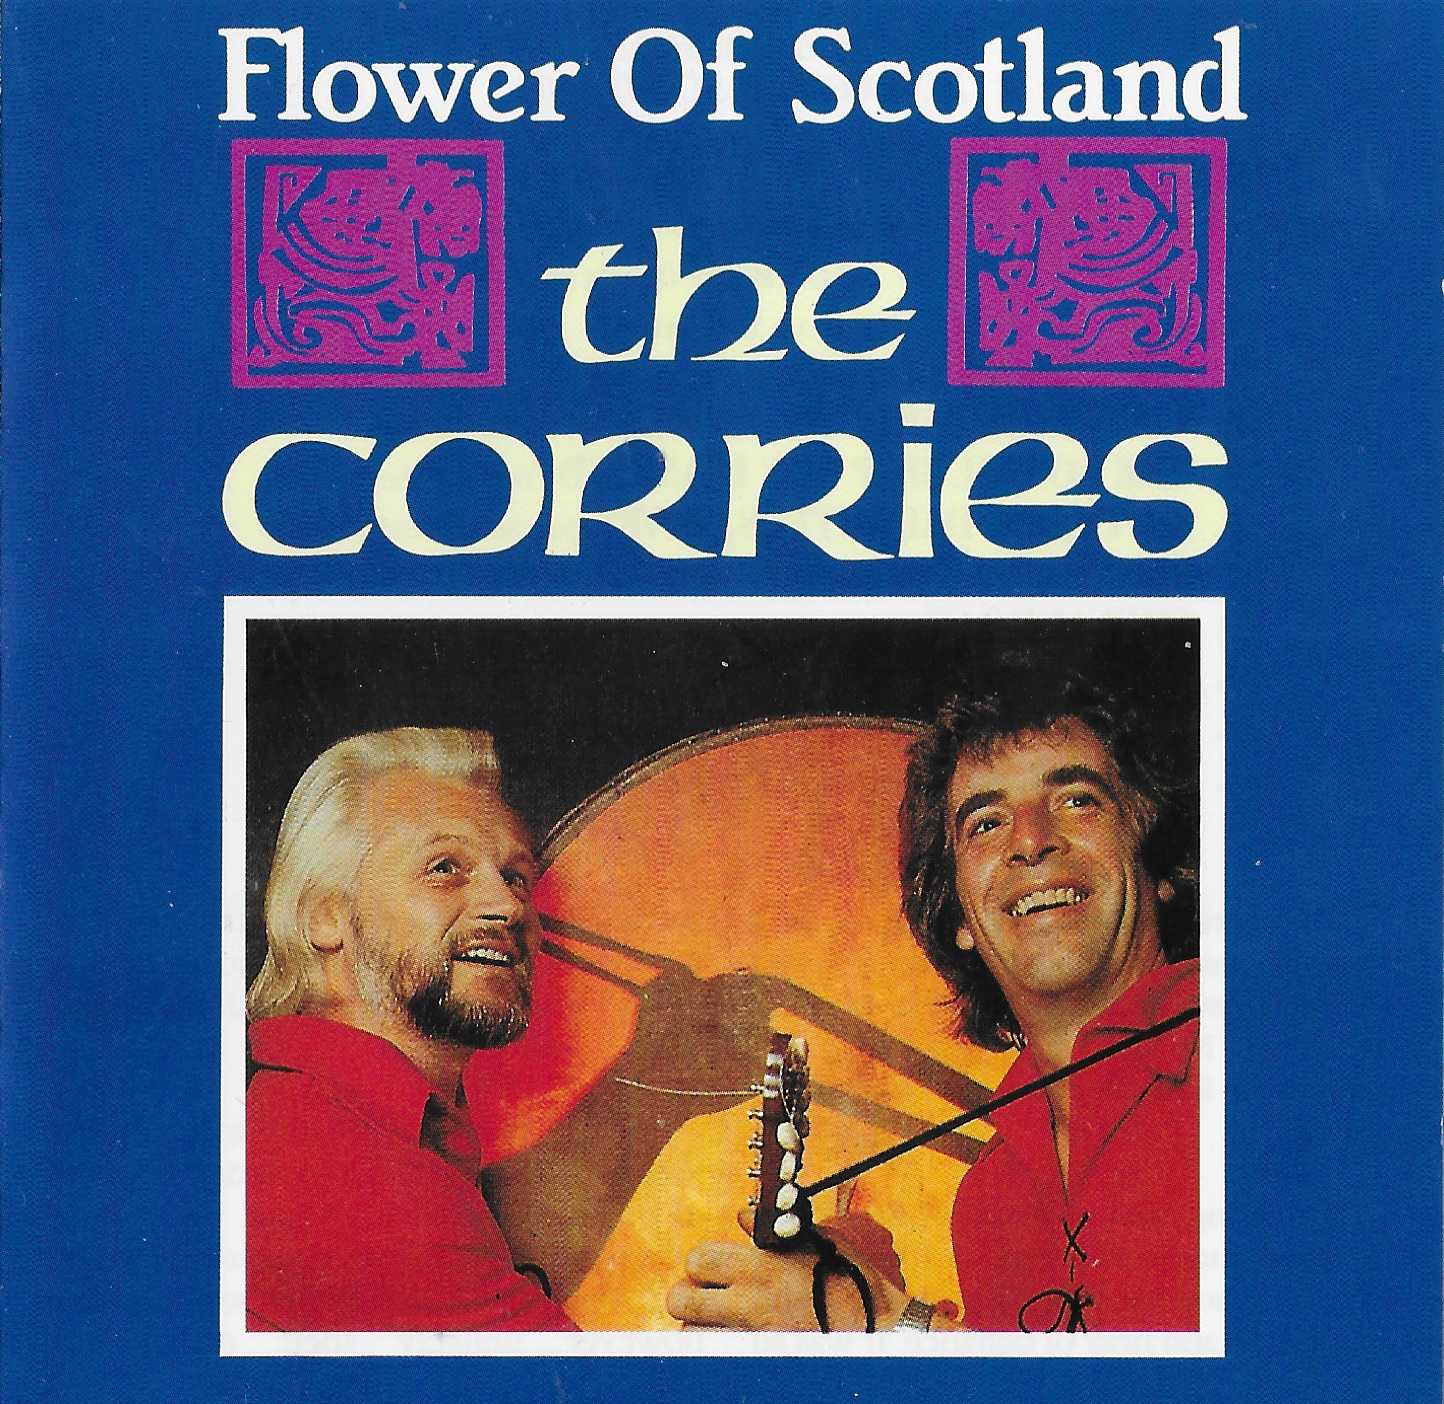 Picture of Flowers of Scotland by artist The Corries from the BBC cds - Records and Tapes library